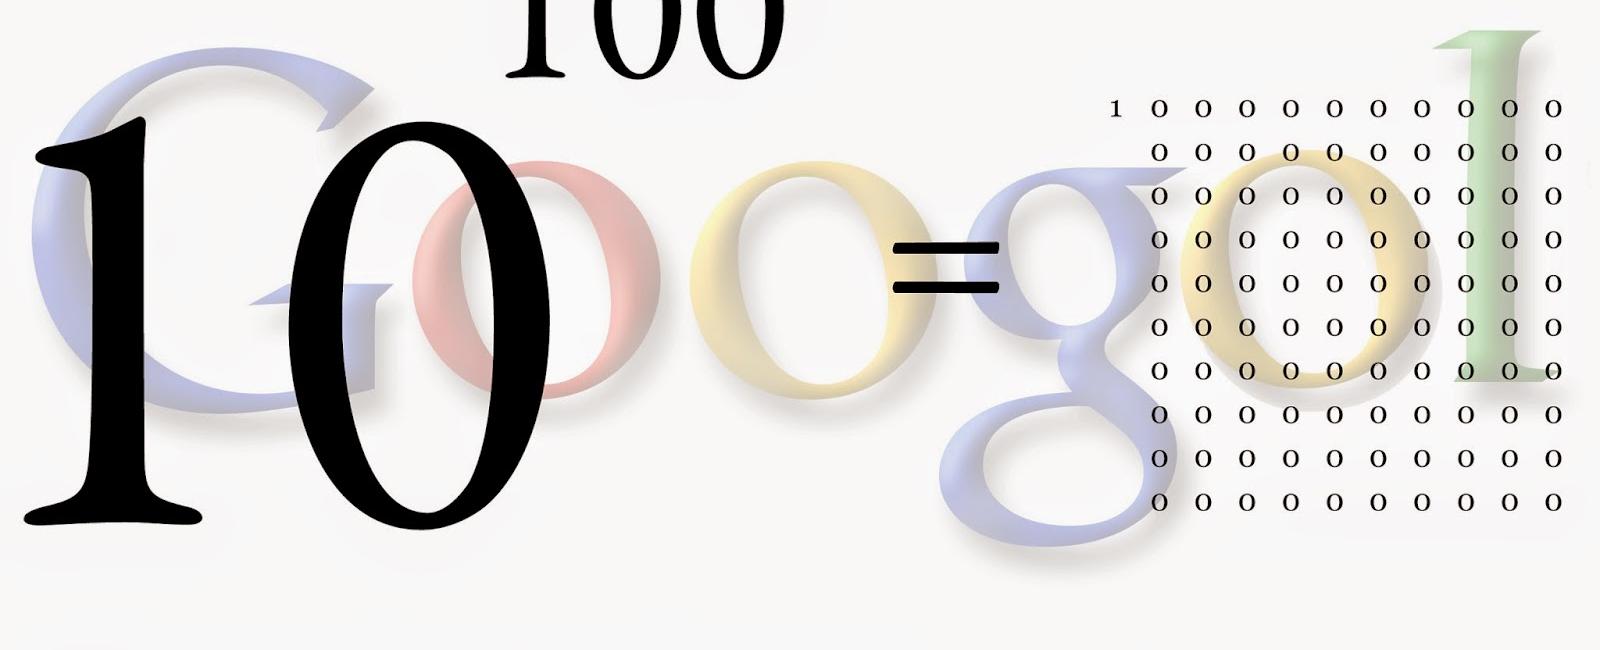 1 googol is the number 1 followed by 100 zeros